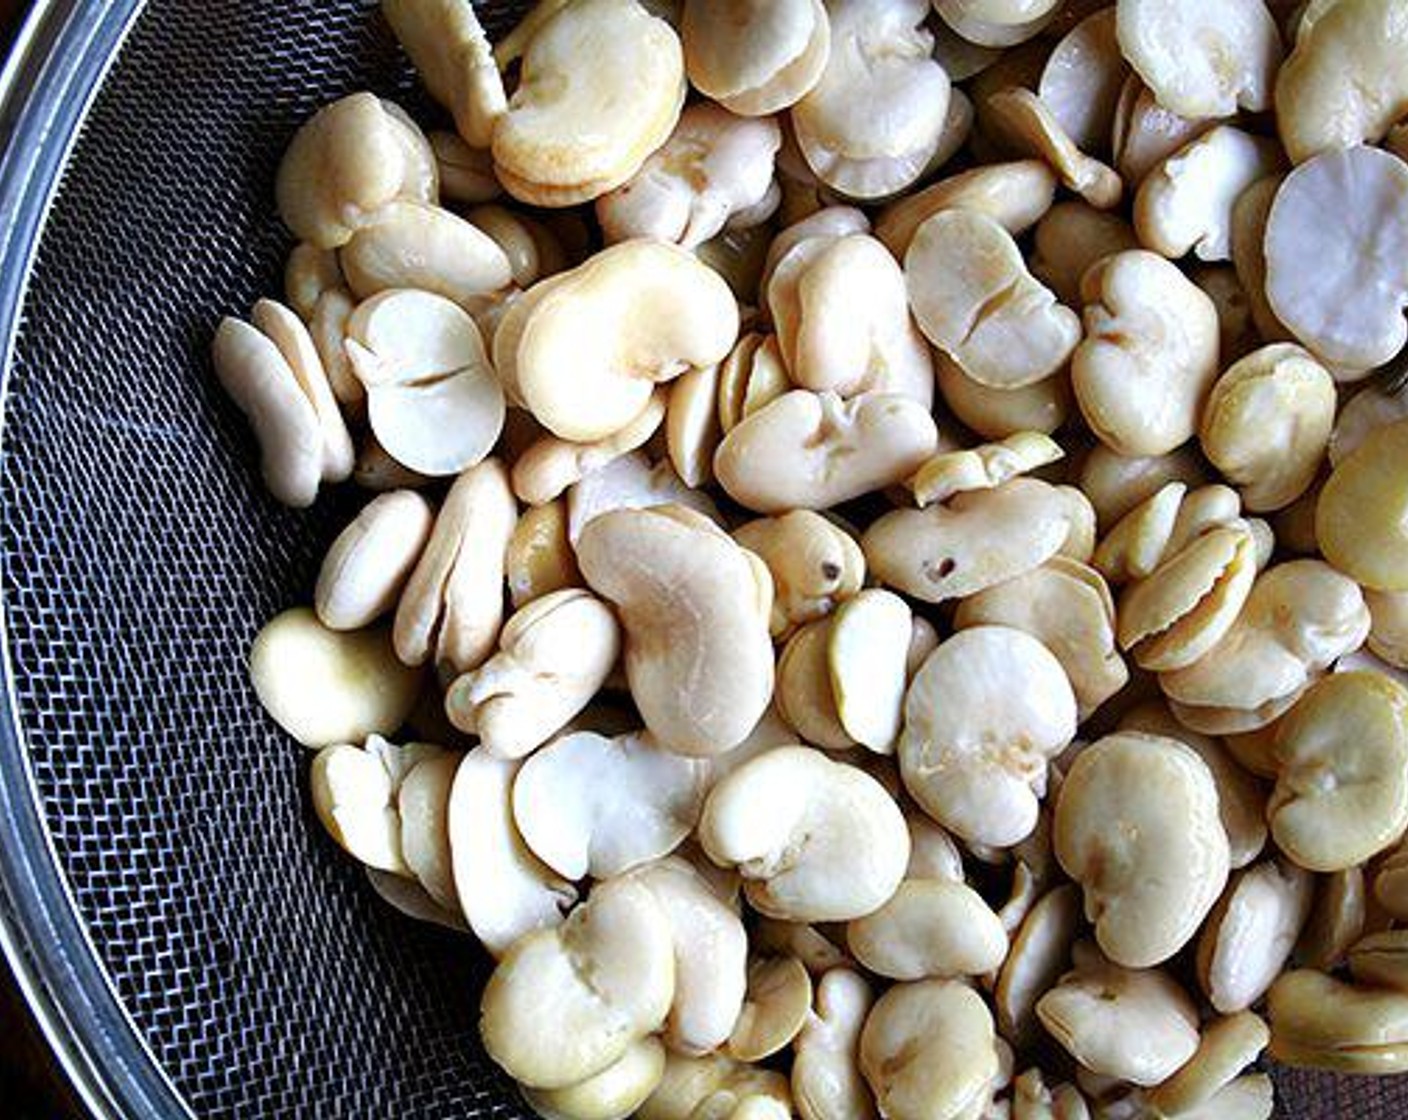 step 1 Put Fava Beans (1 3/4 cups) in a large bowl and cover with water by 3 or 4 inches; they will triple in volume. Soak for 24 hours, adding water if needed to keep the beans submerged.